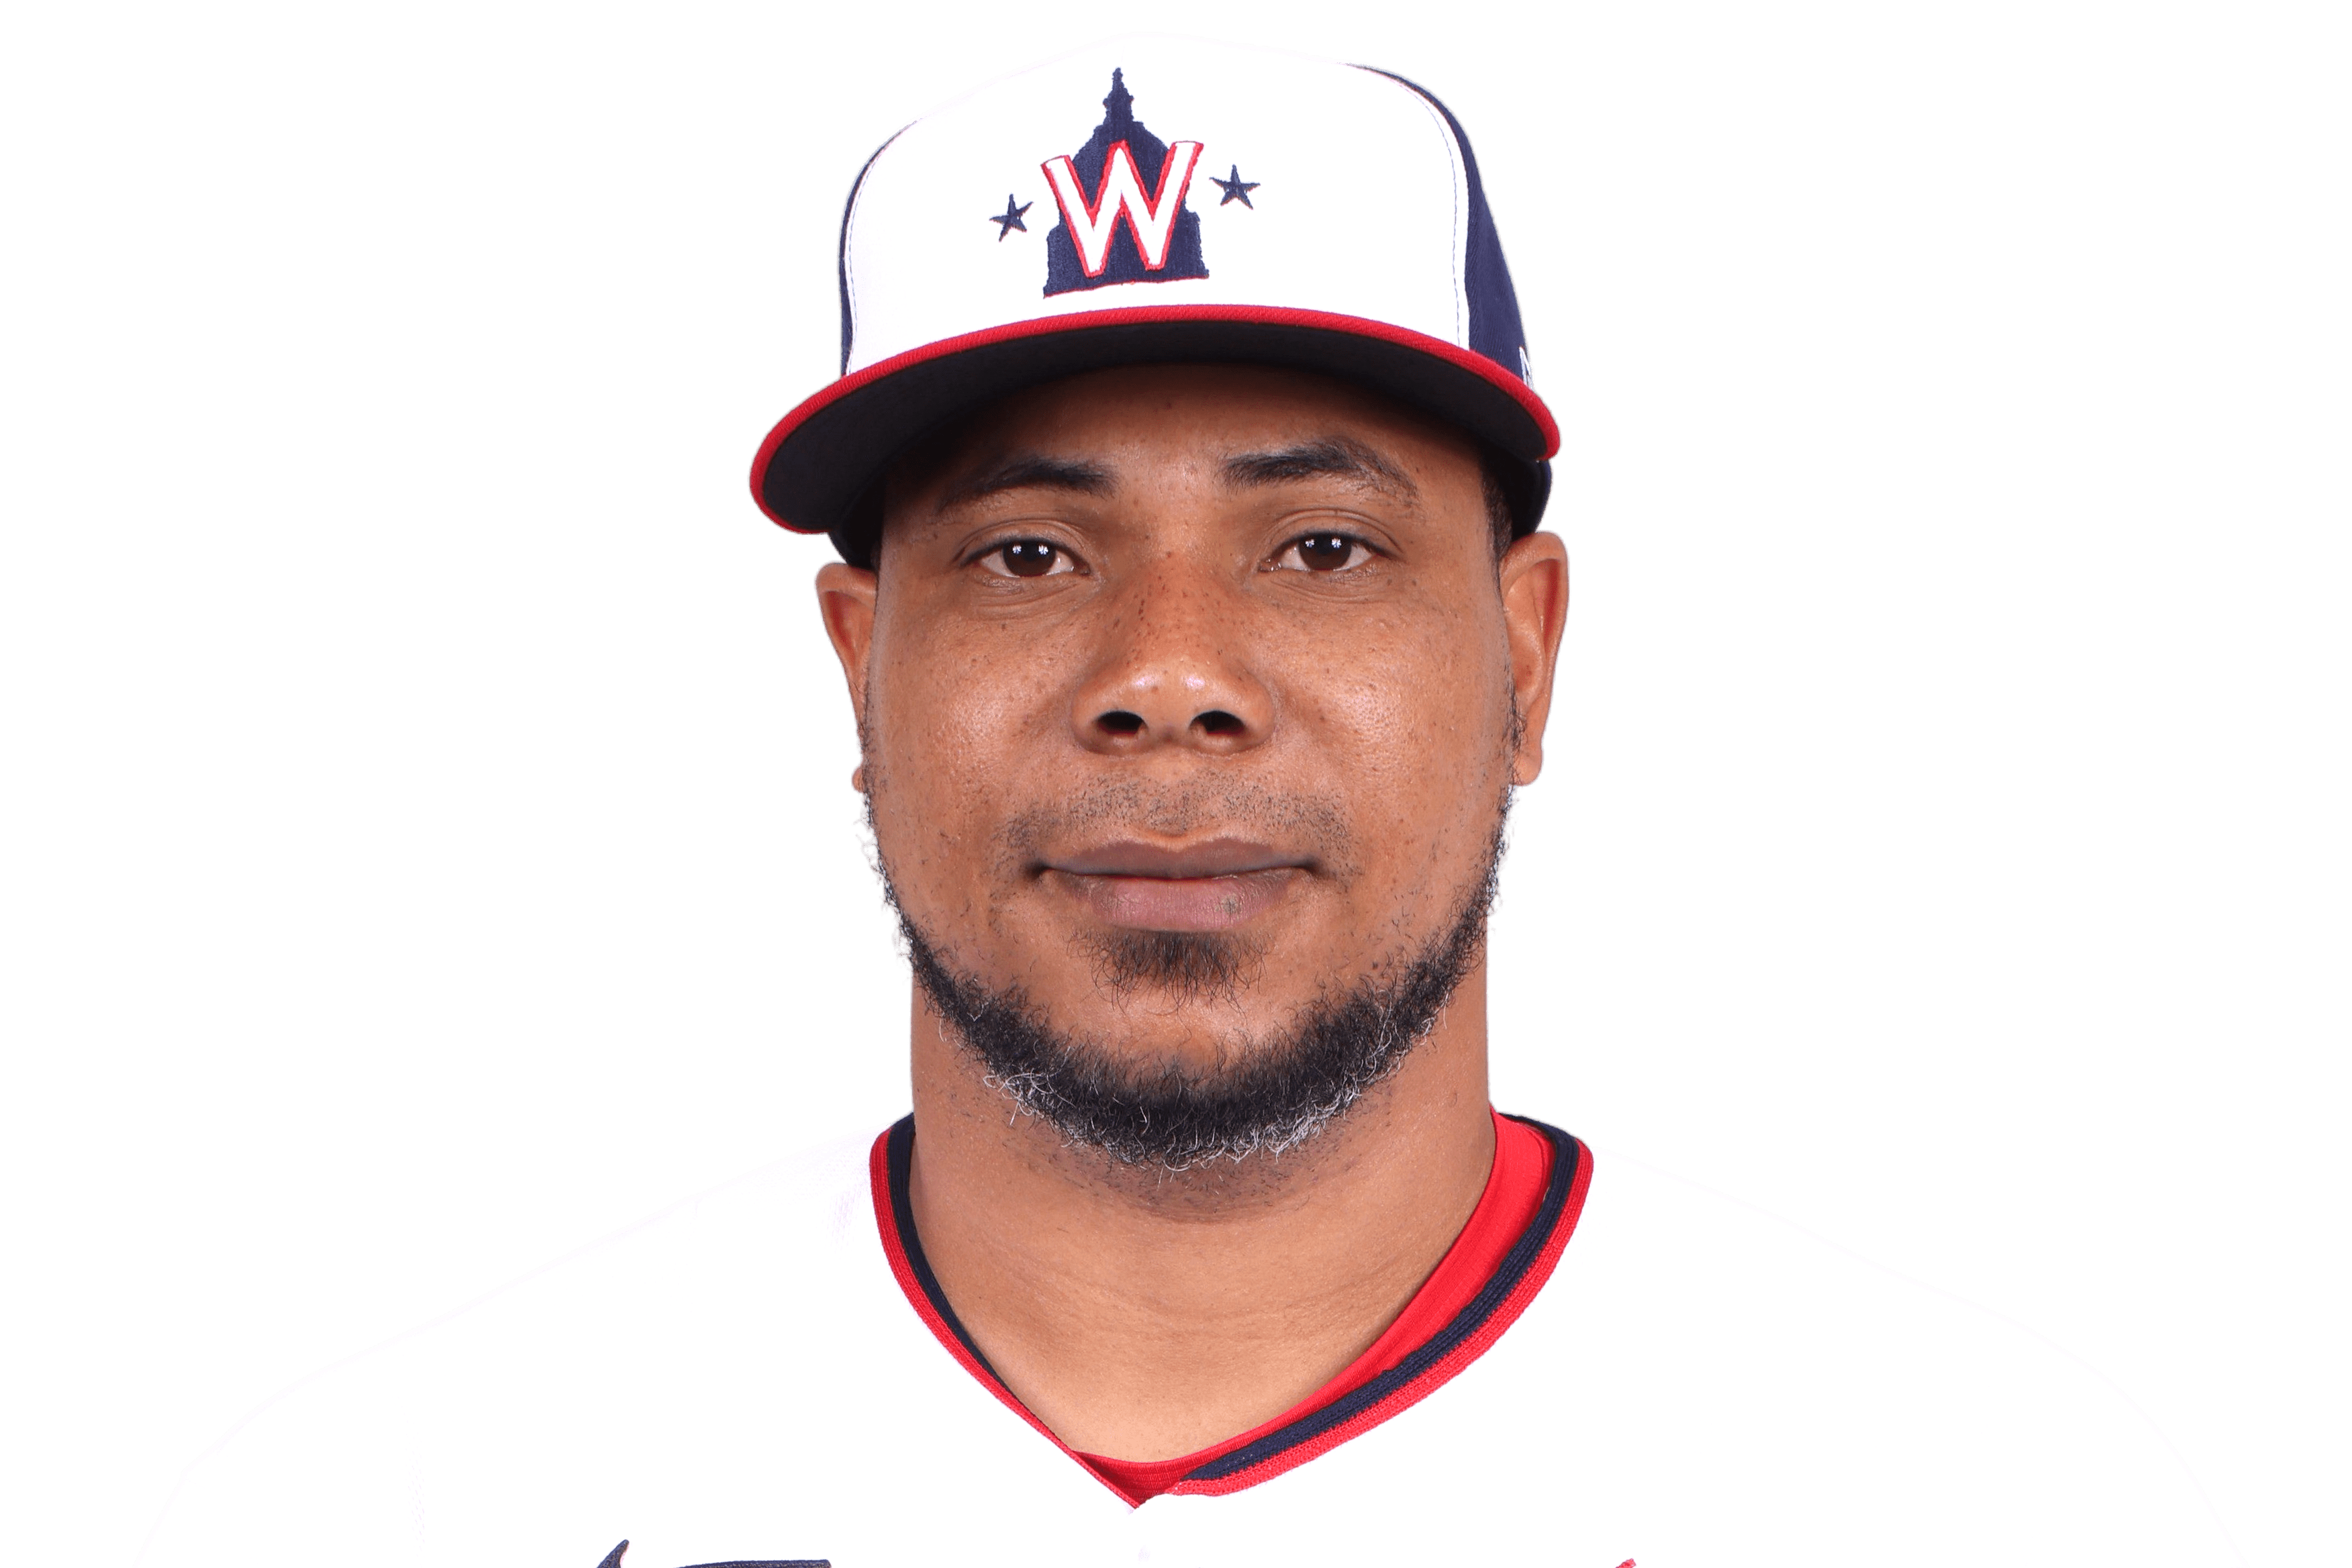 Wily Peralta